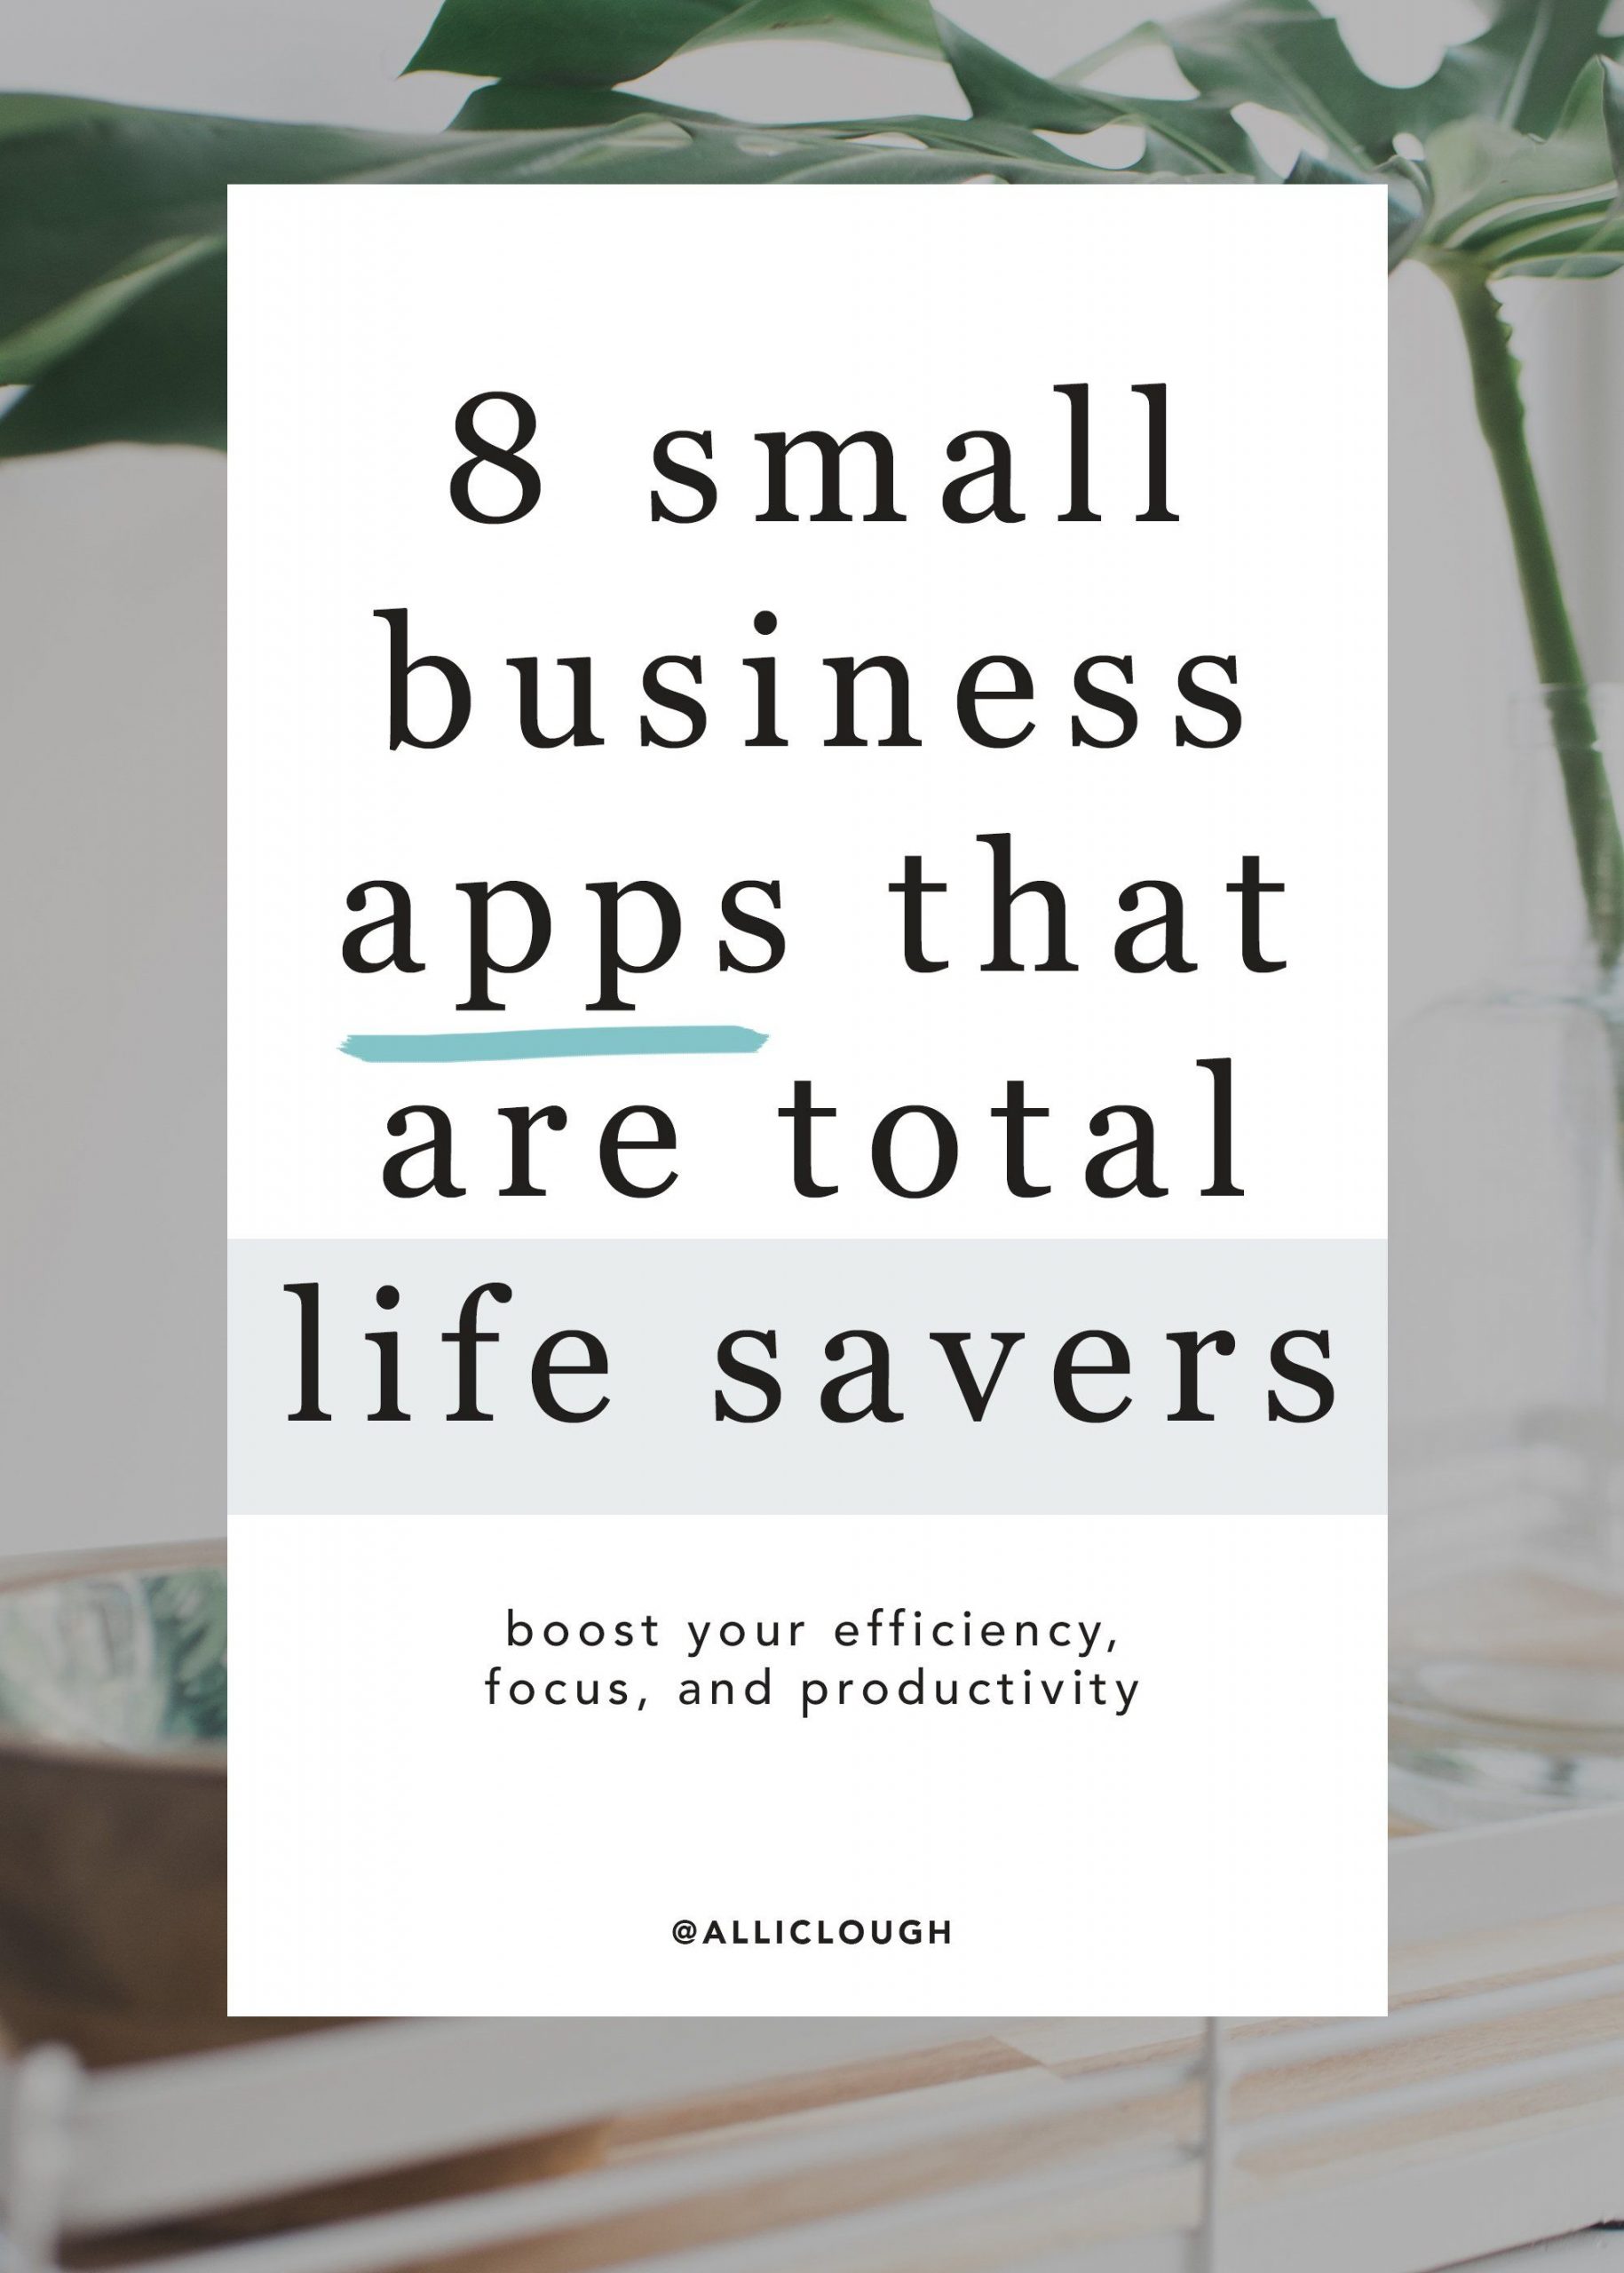 8 Small Business Apps That Are Total Life Savers - work-from-home